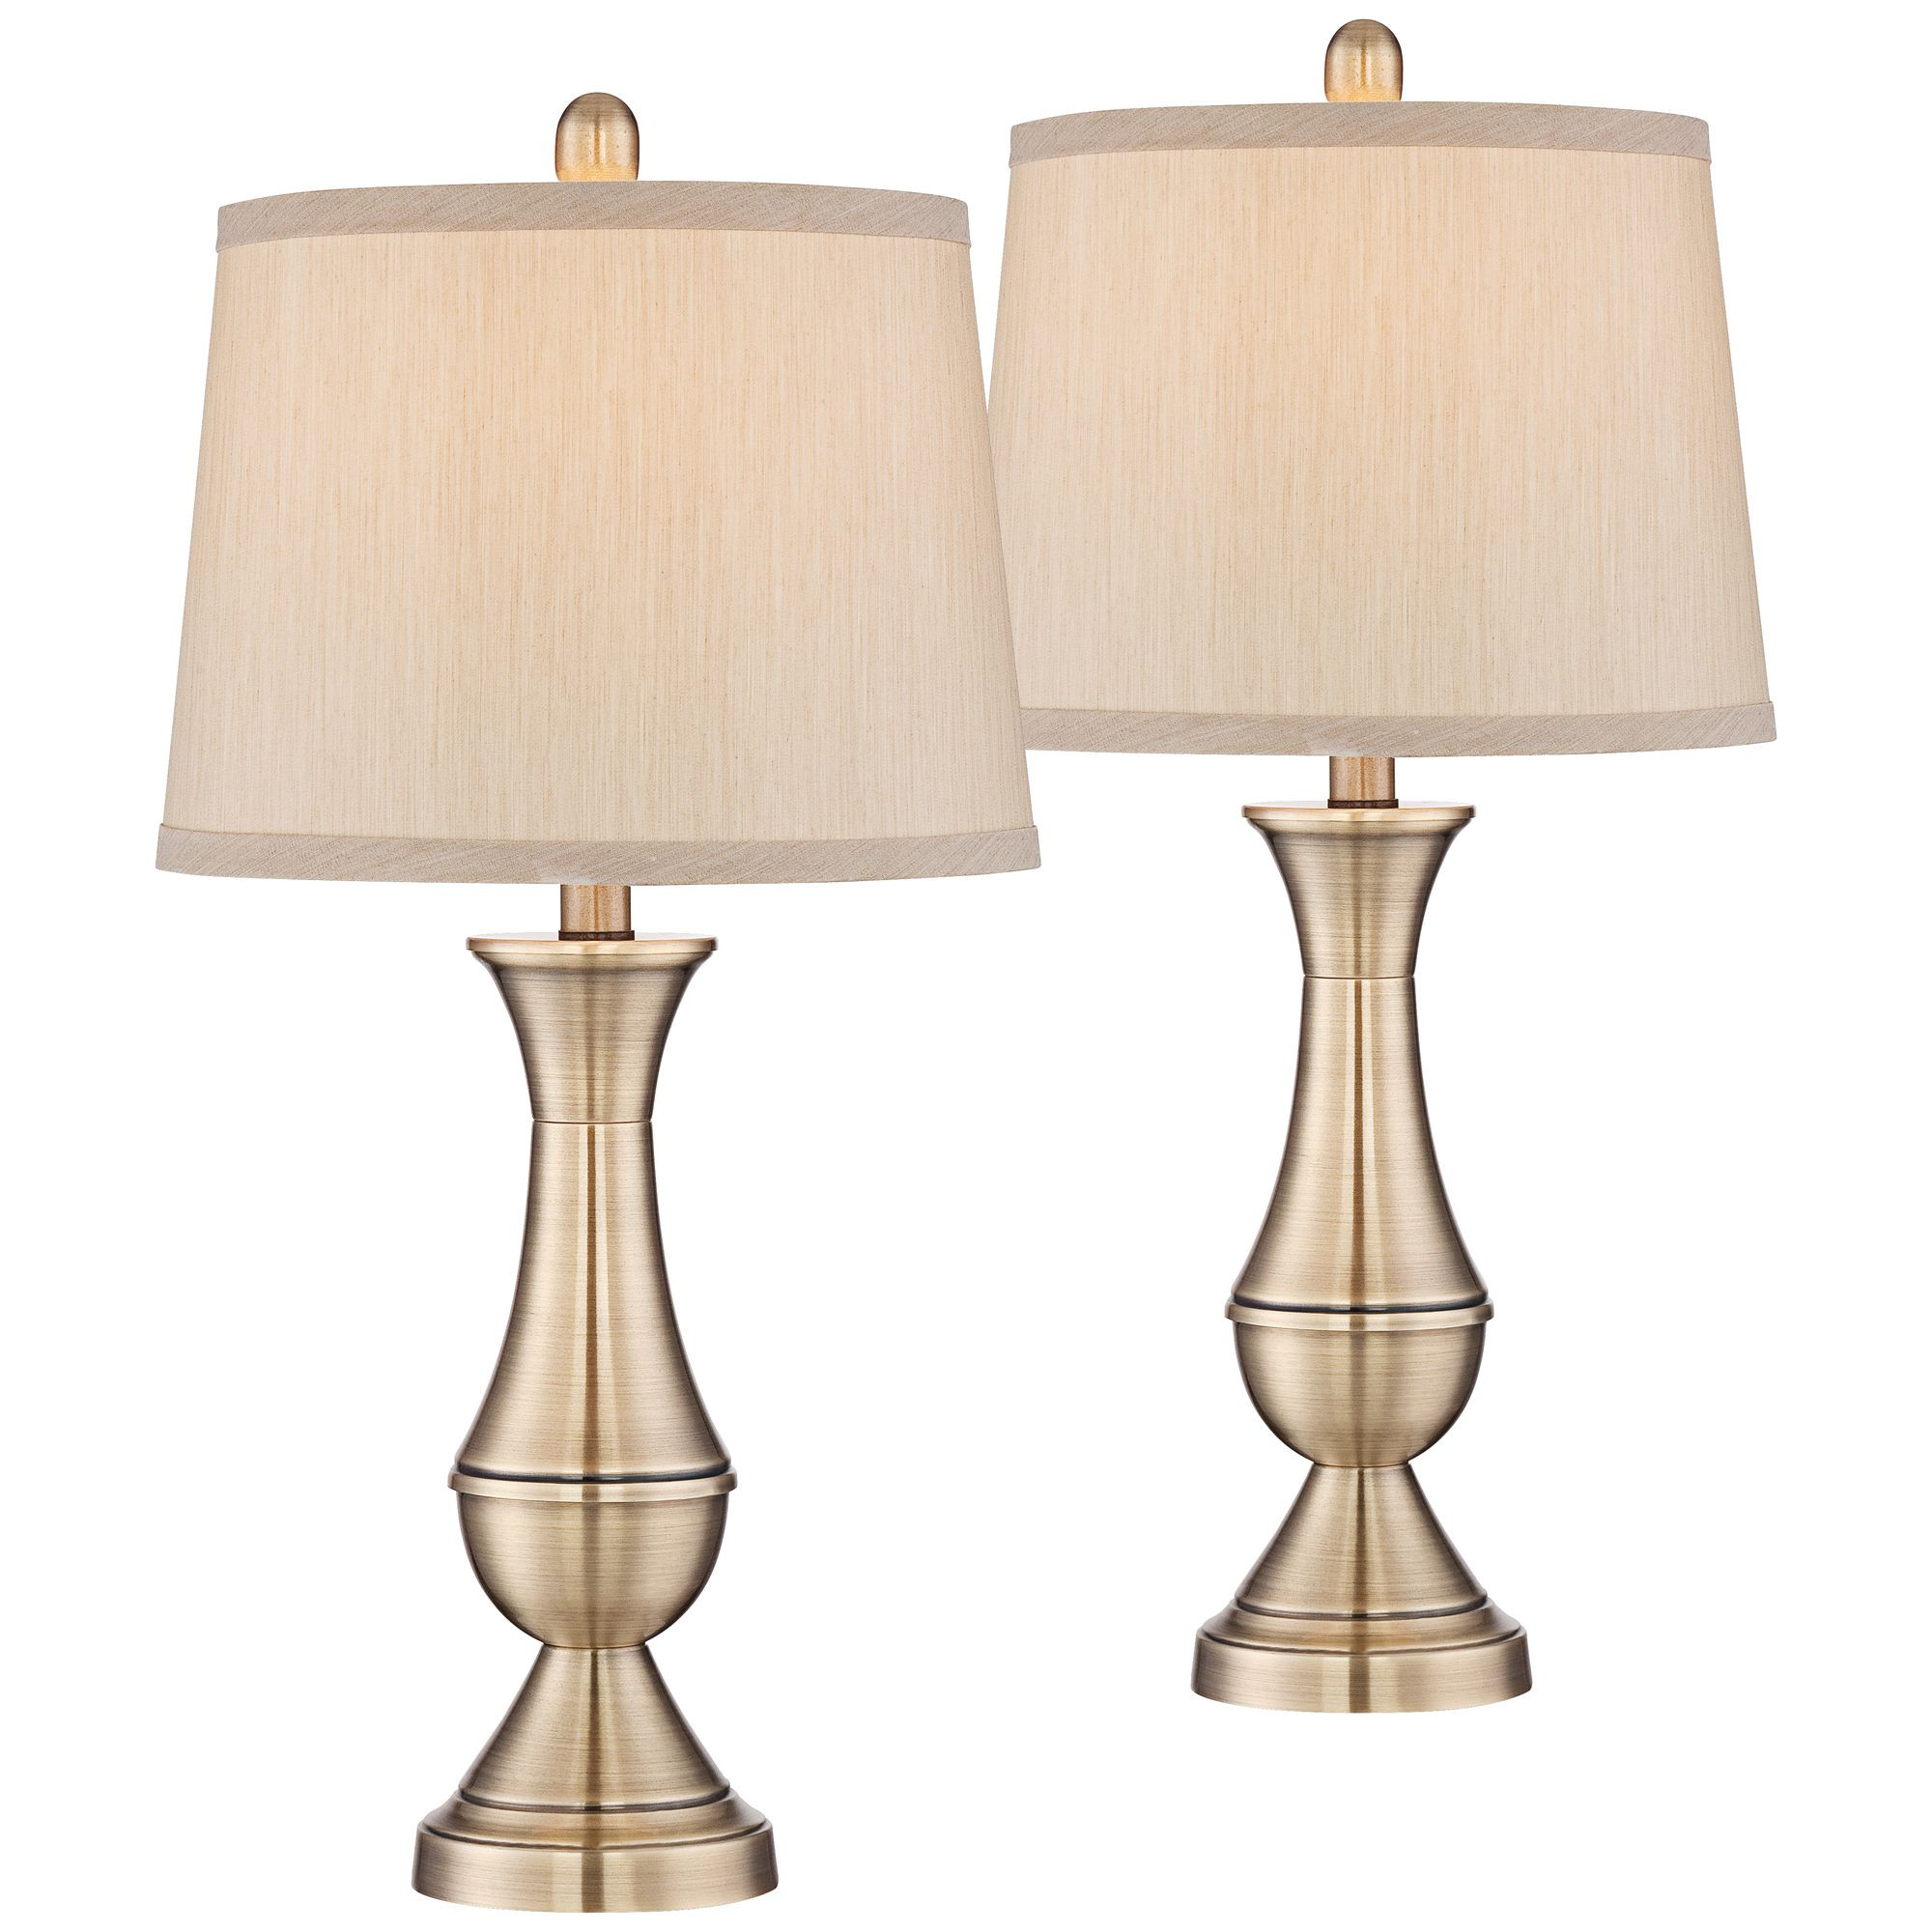 Living Room Table Lamp Sets
 Regency Hill Traditional Table Lamps Set of 2 Antique